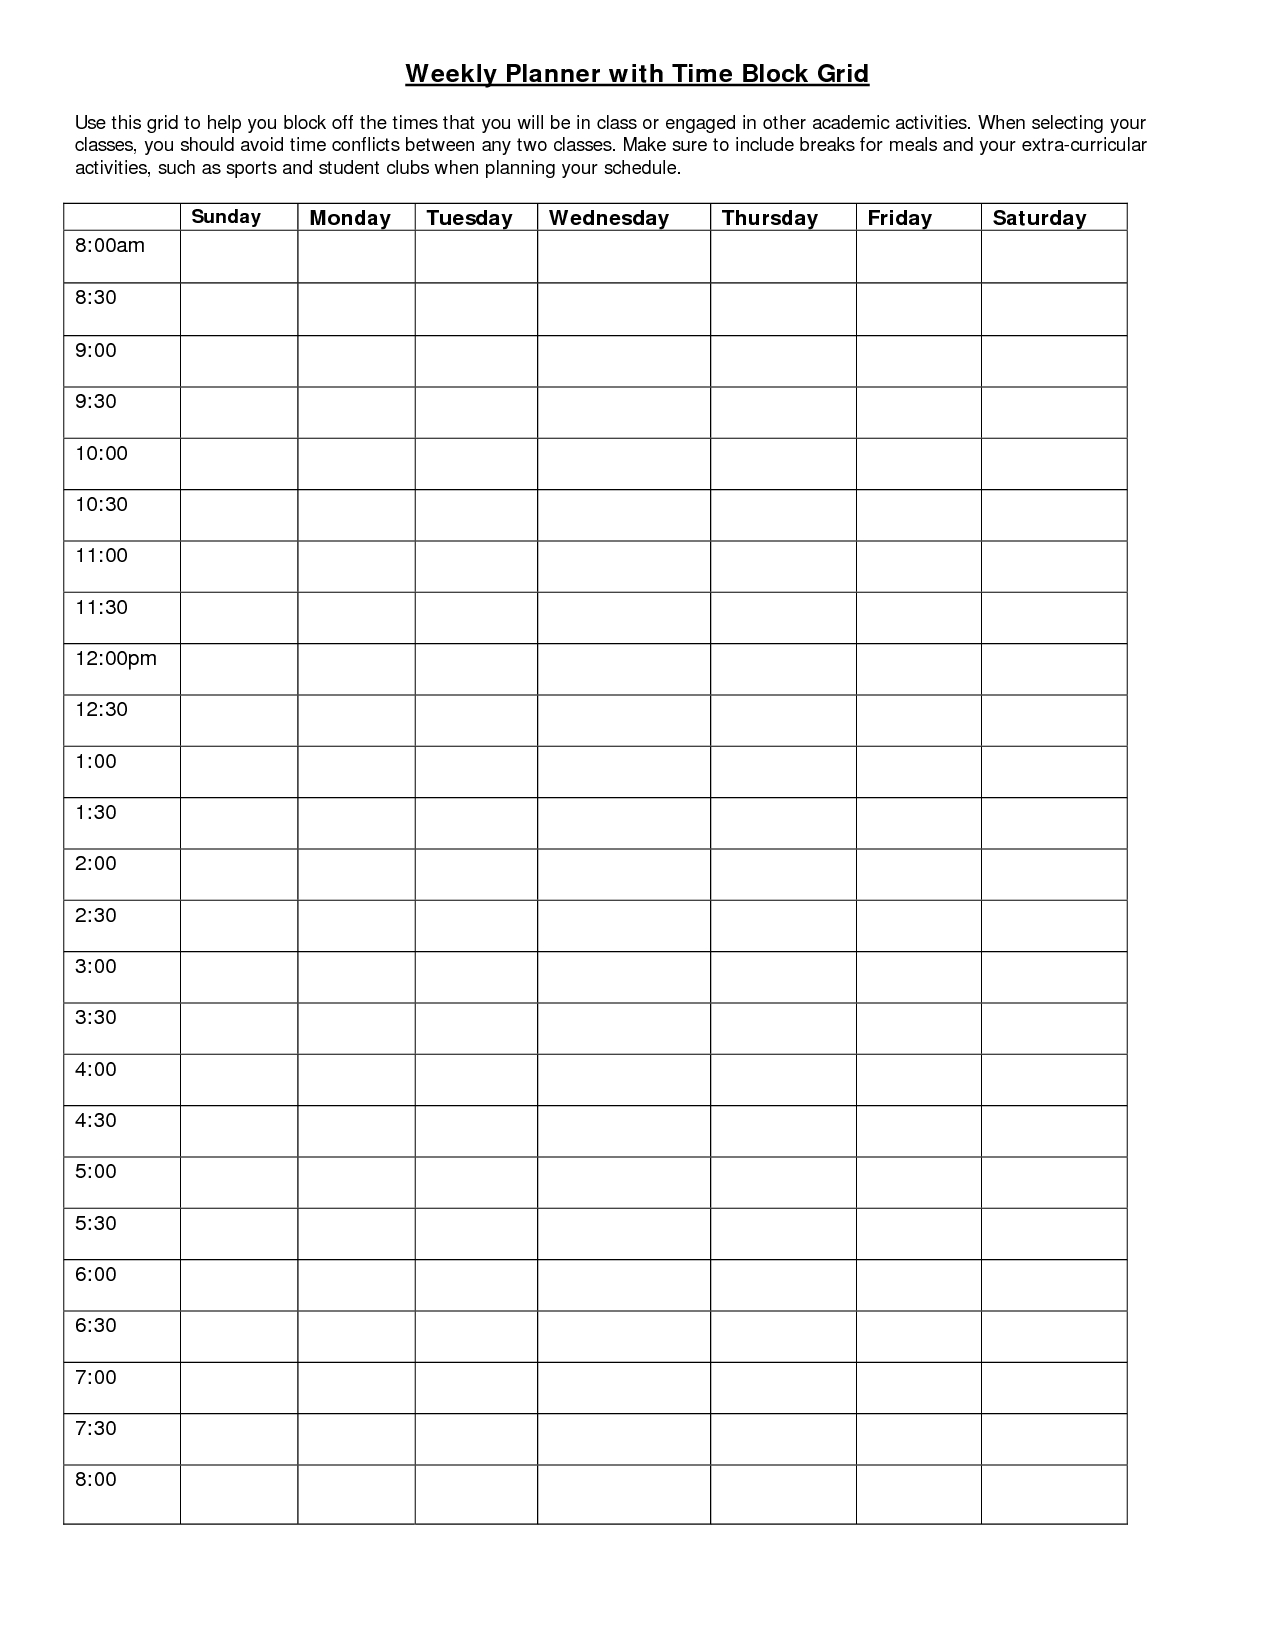 Weekly Planner With Time Block Grid | Weekly Planner Remarkable 24 Hour 7 Day Template